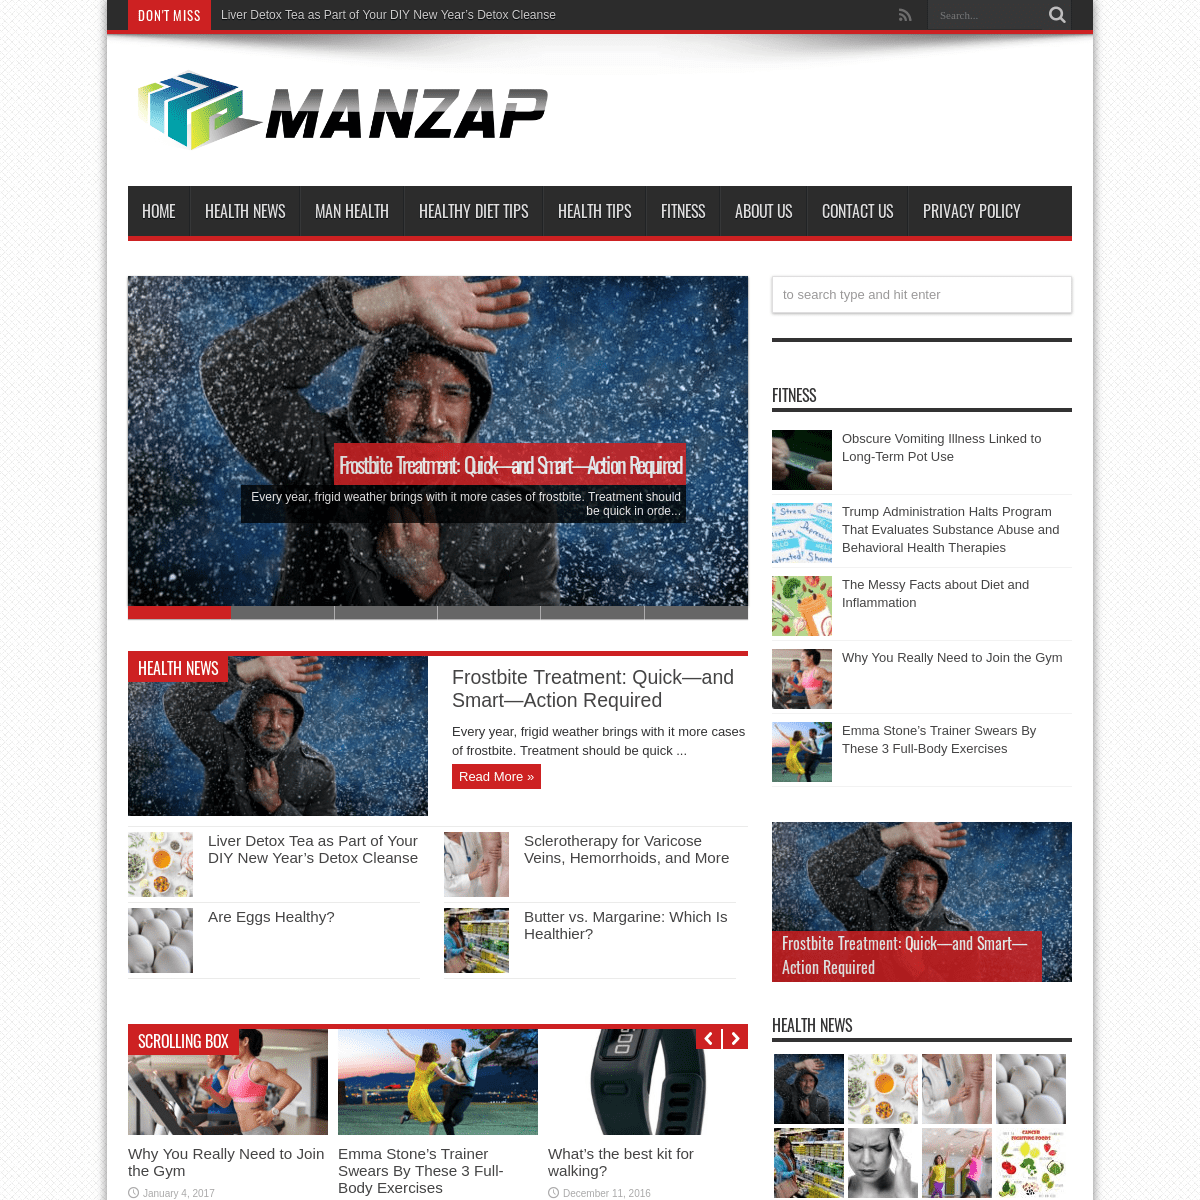 A complete backup of manzap.com